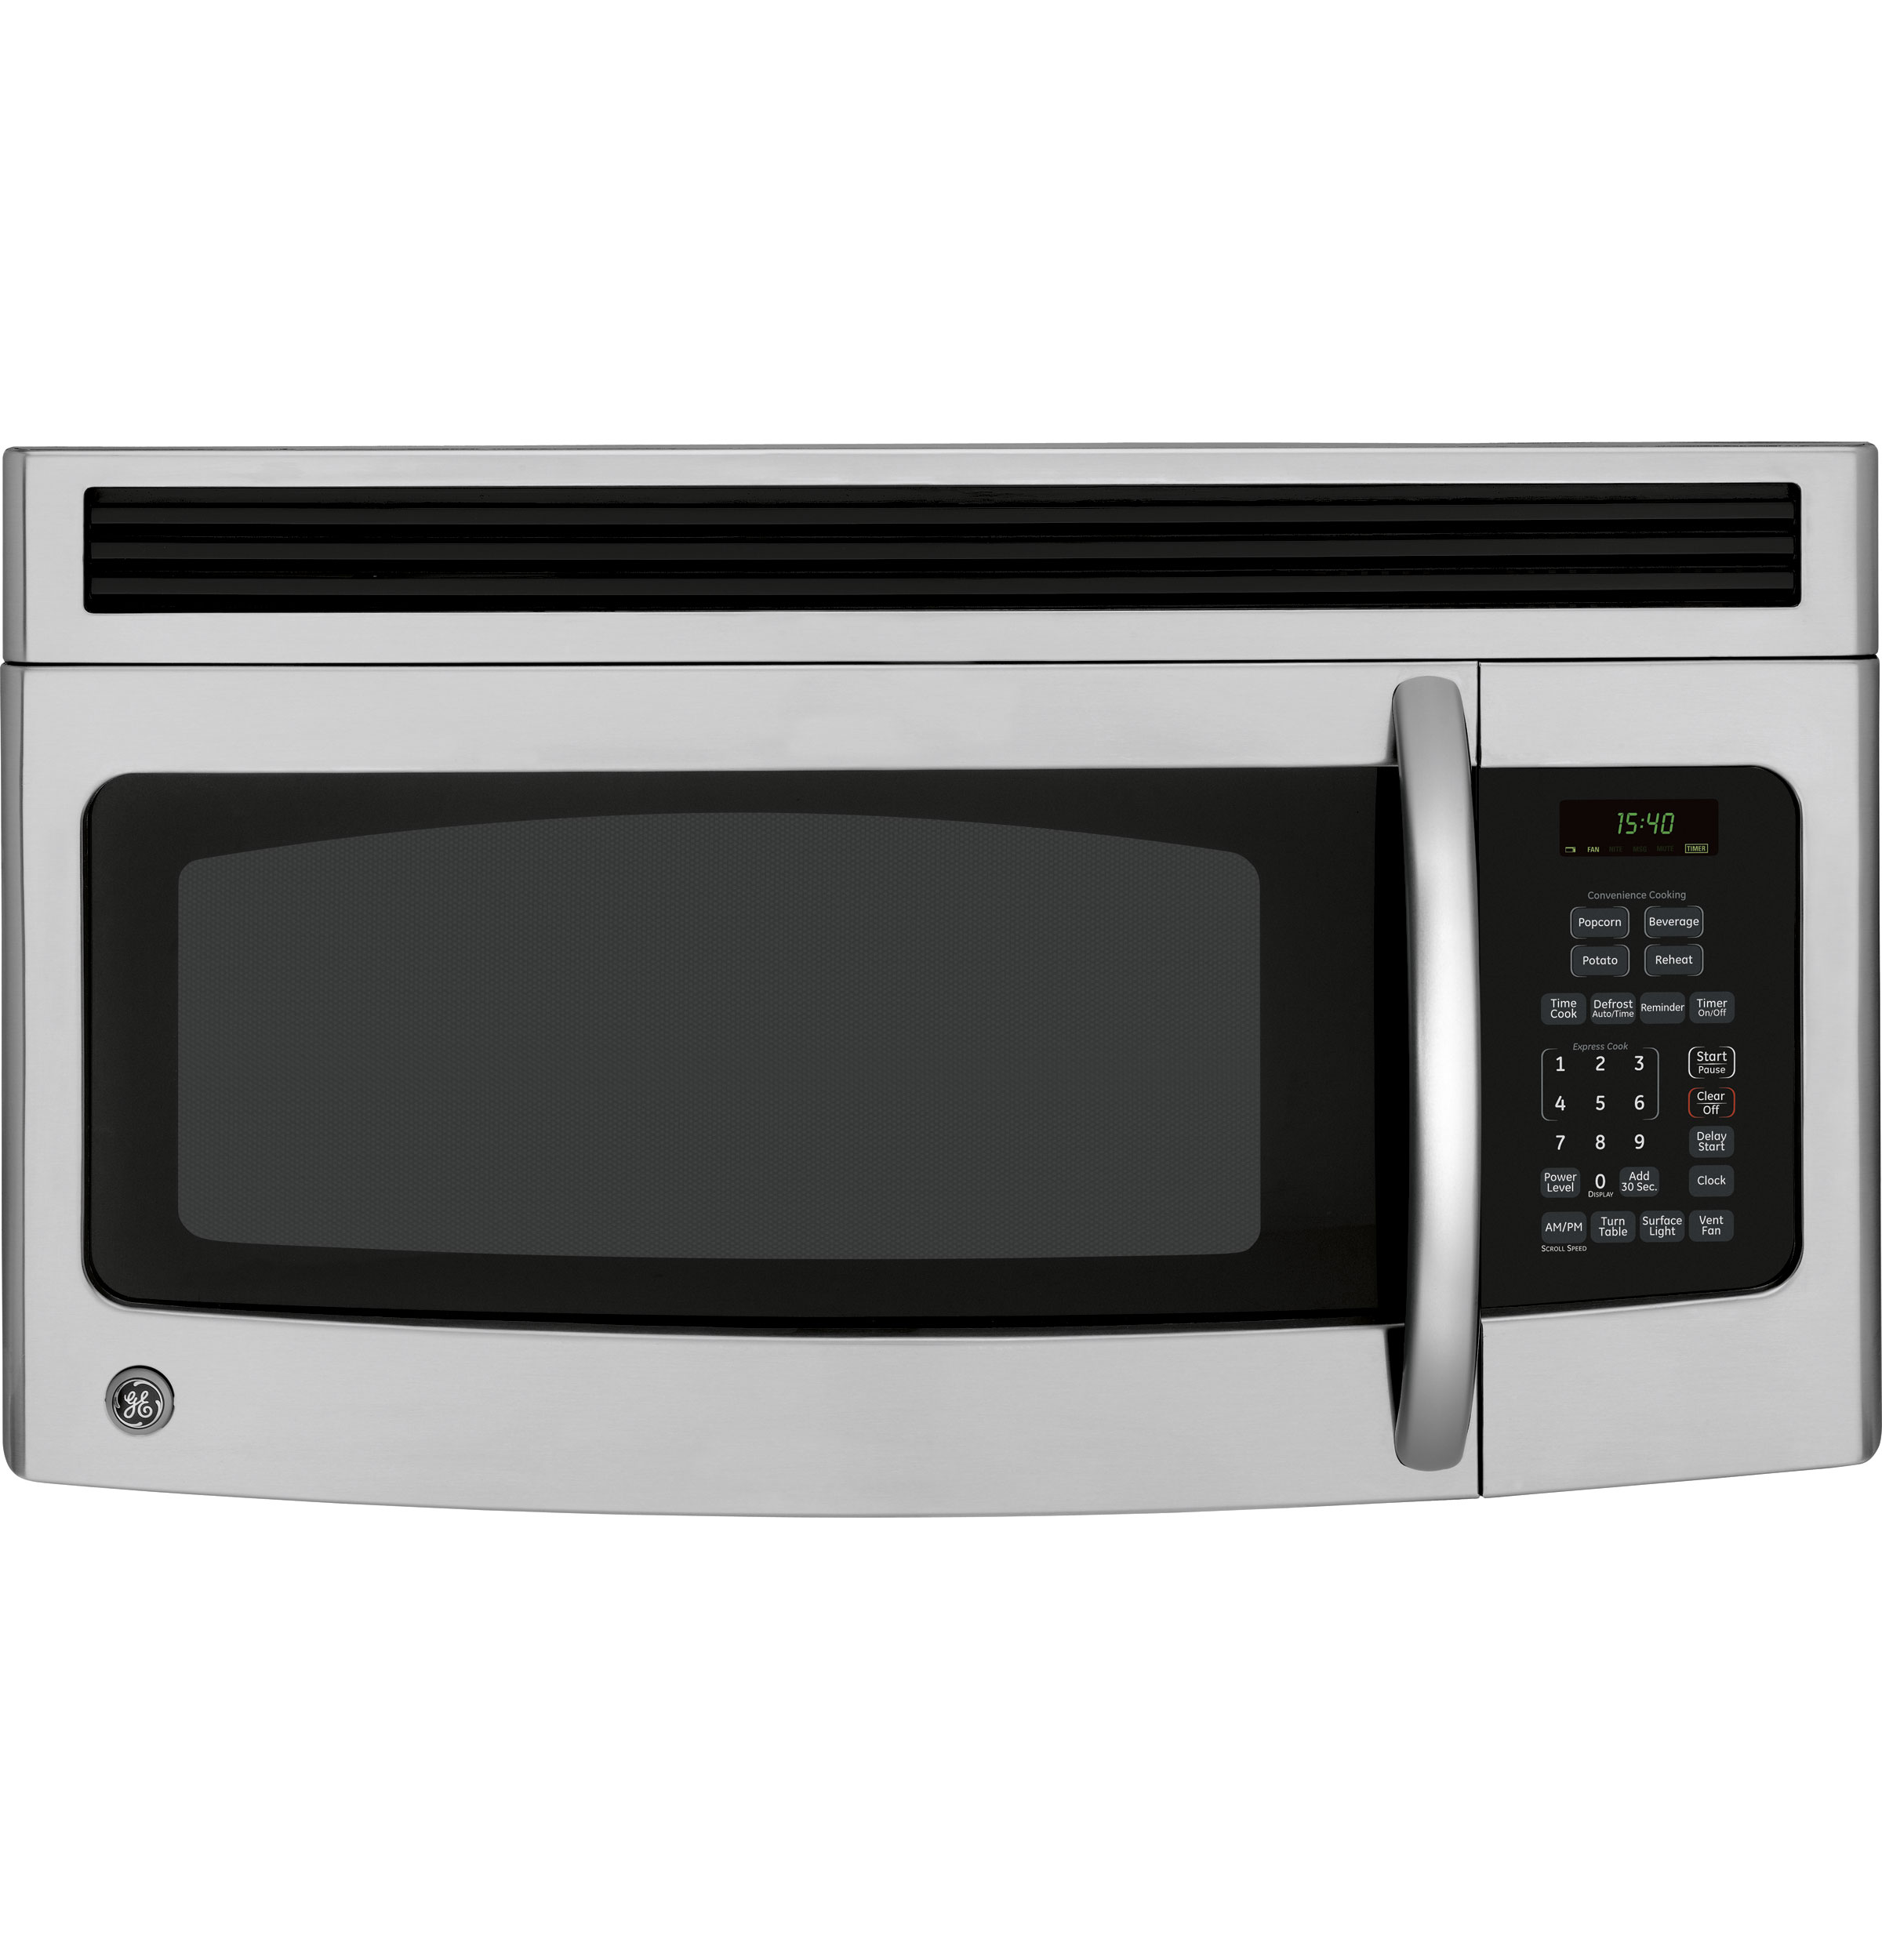 GE Spacemaker® 1.5 Cu. Ft. Over-the-Range Microwave Oven